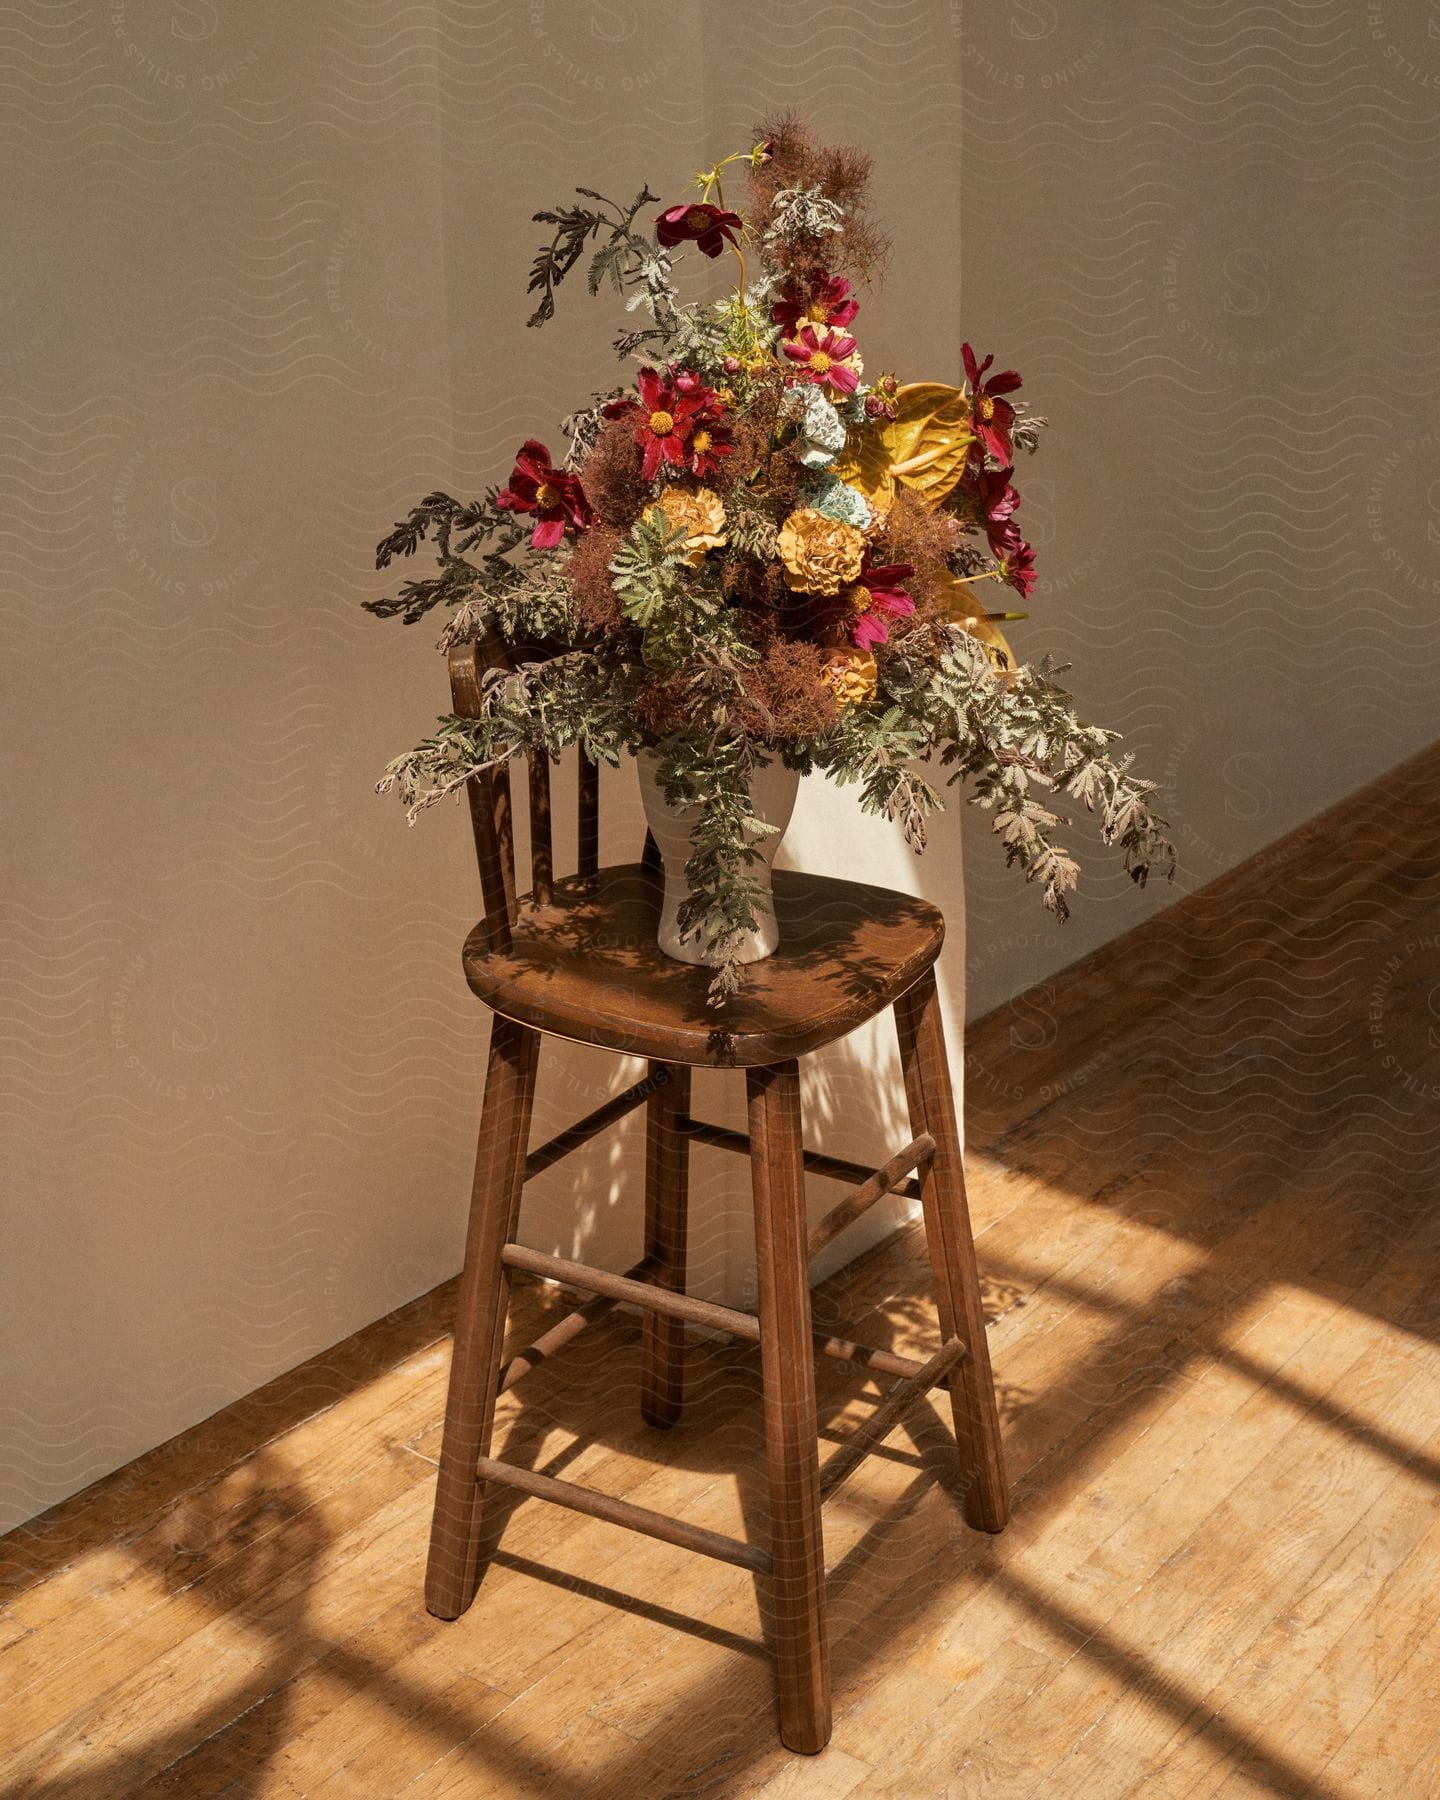 A bouquet of flowers in a glass vase is sitting on a stool near a wall